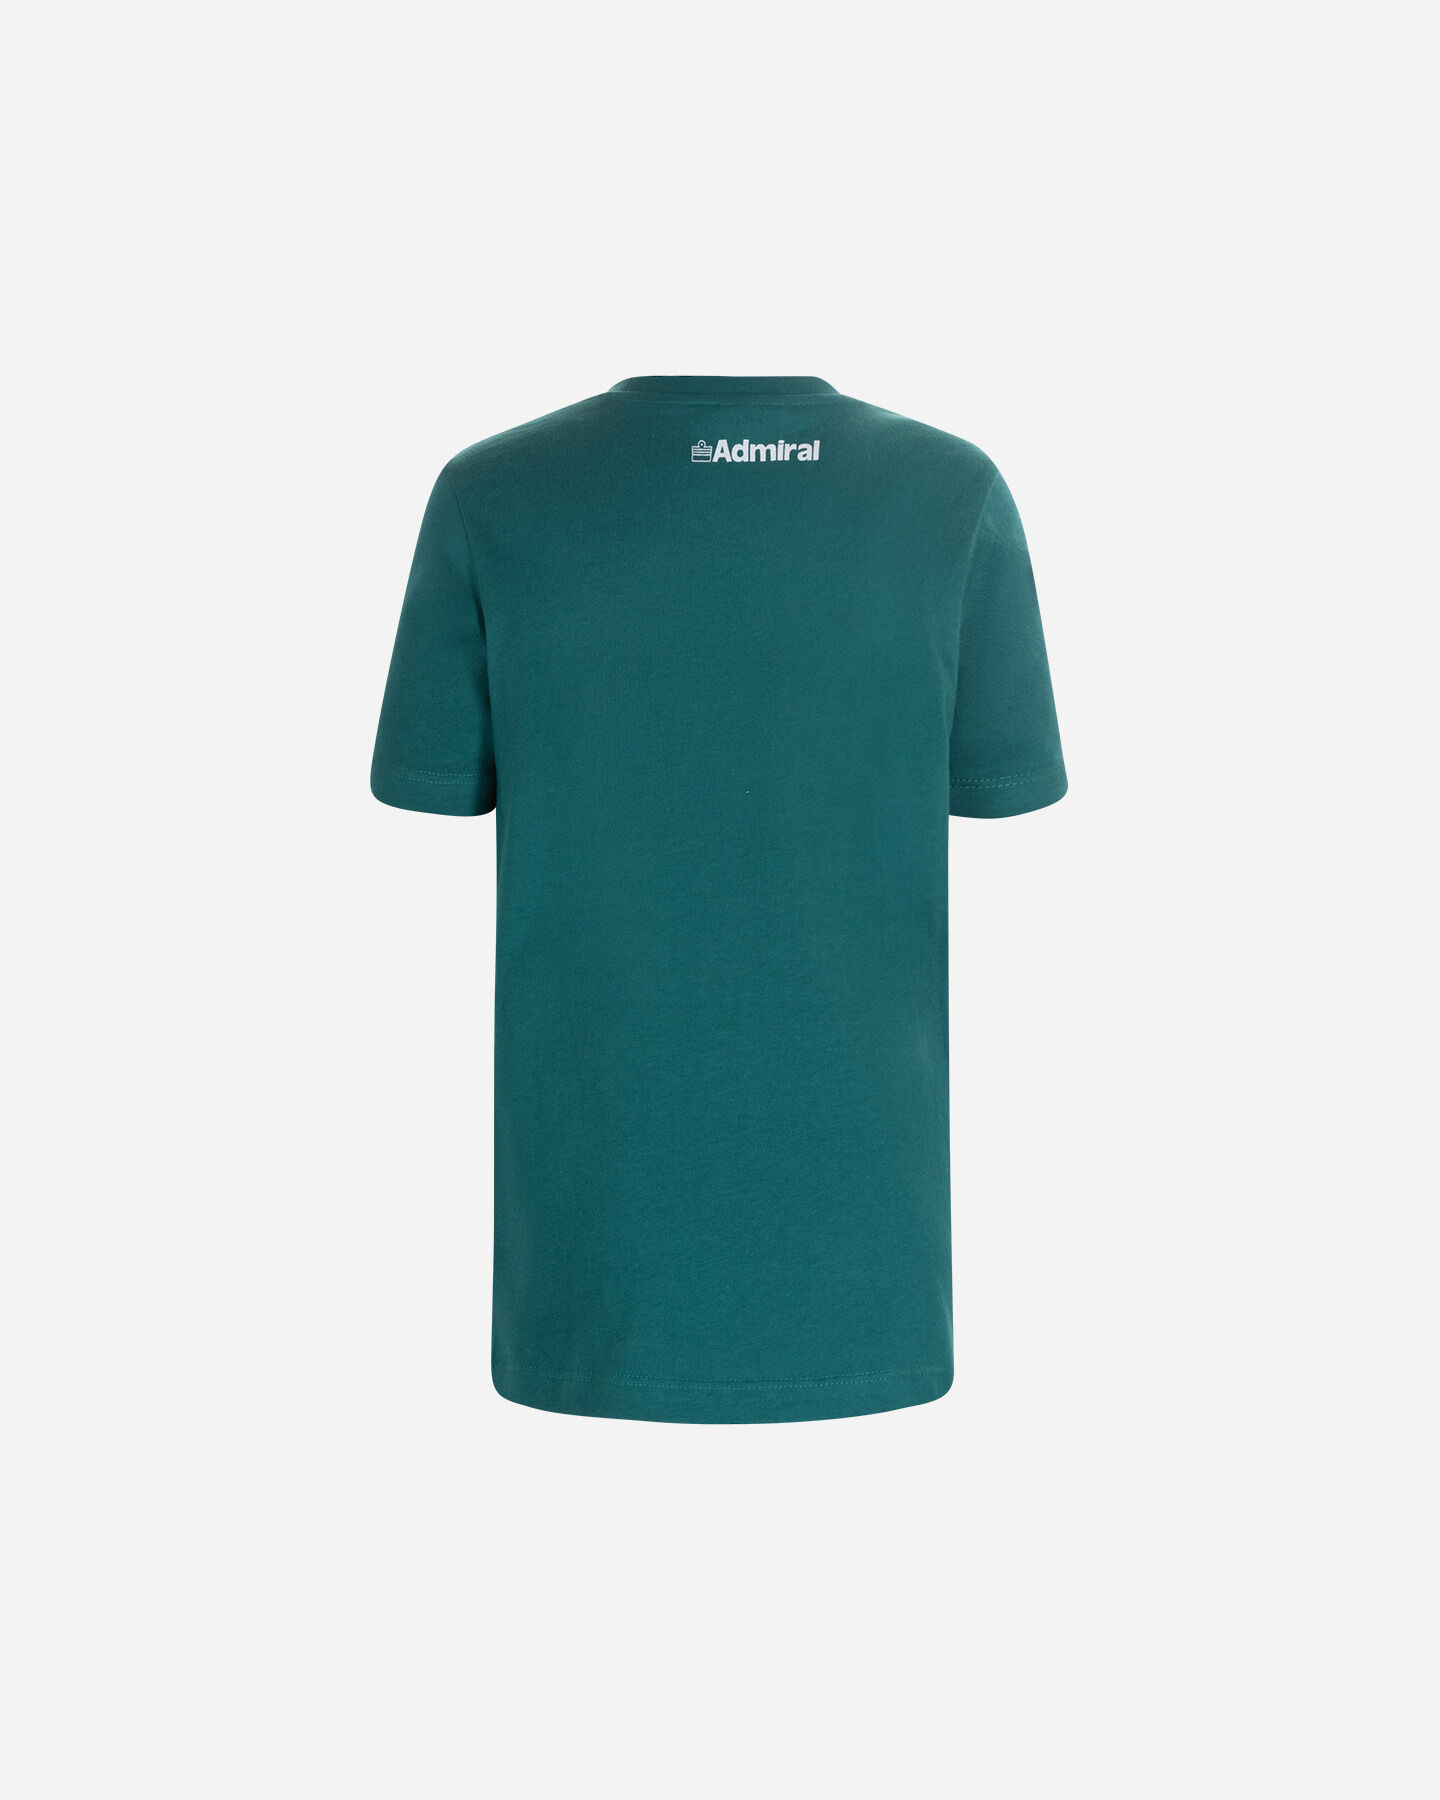  T-Shirt ADMIRAL BASIC SPORT JR S4119898|789|4A scatto 1